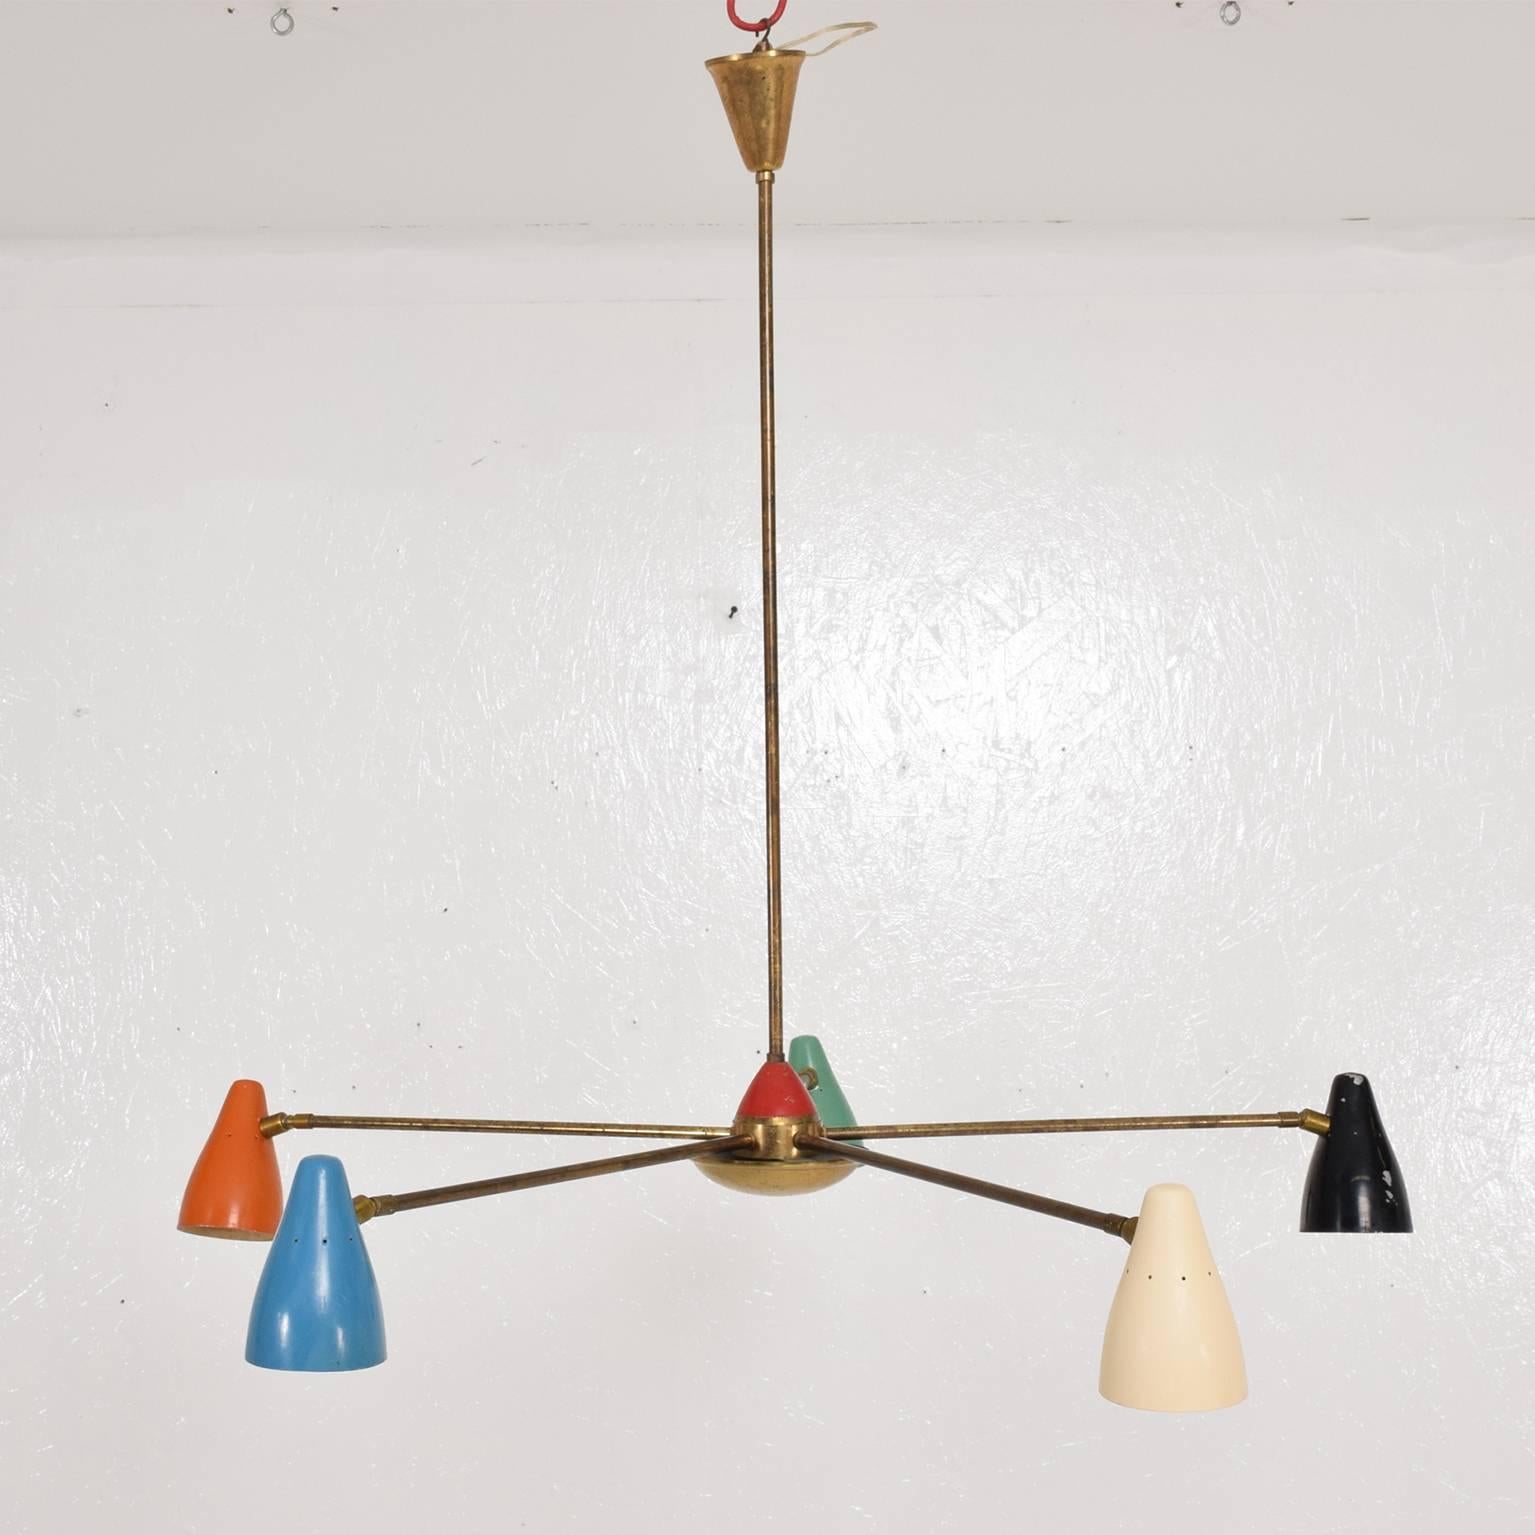 A vintage Italian chandelier with five arms and color sconces. 
Brass arms with aluminum sconces with five different colors. 
Chandelier has been rewired, however it retains the original finish and patina. No label present from the maker. Italy